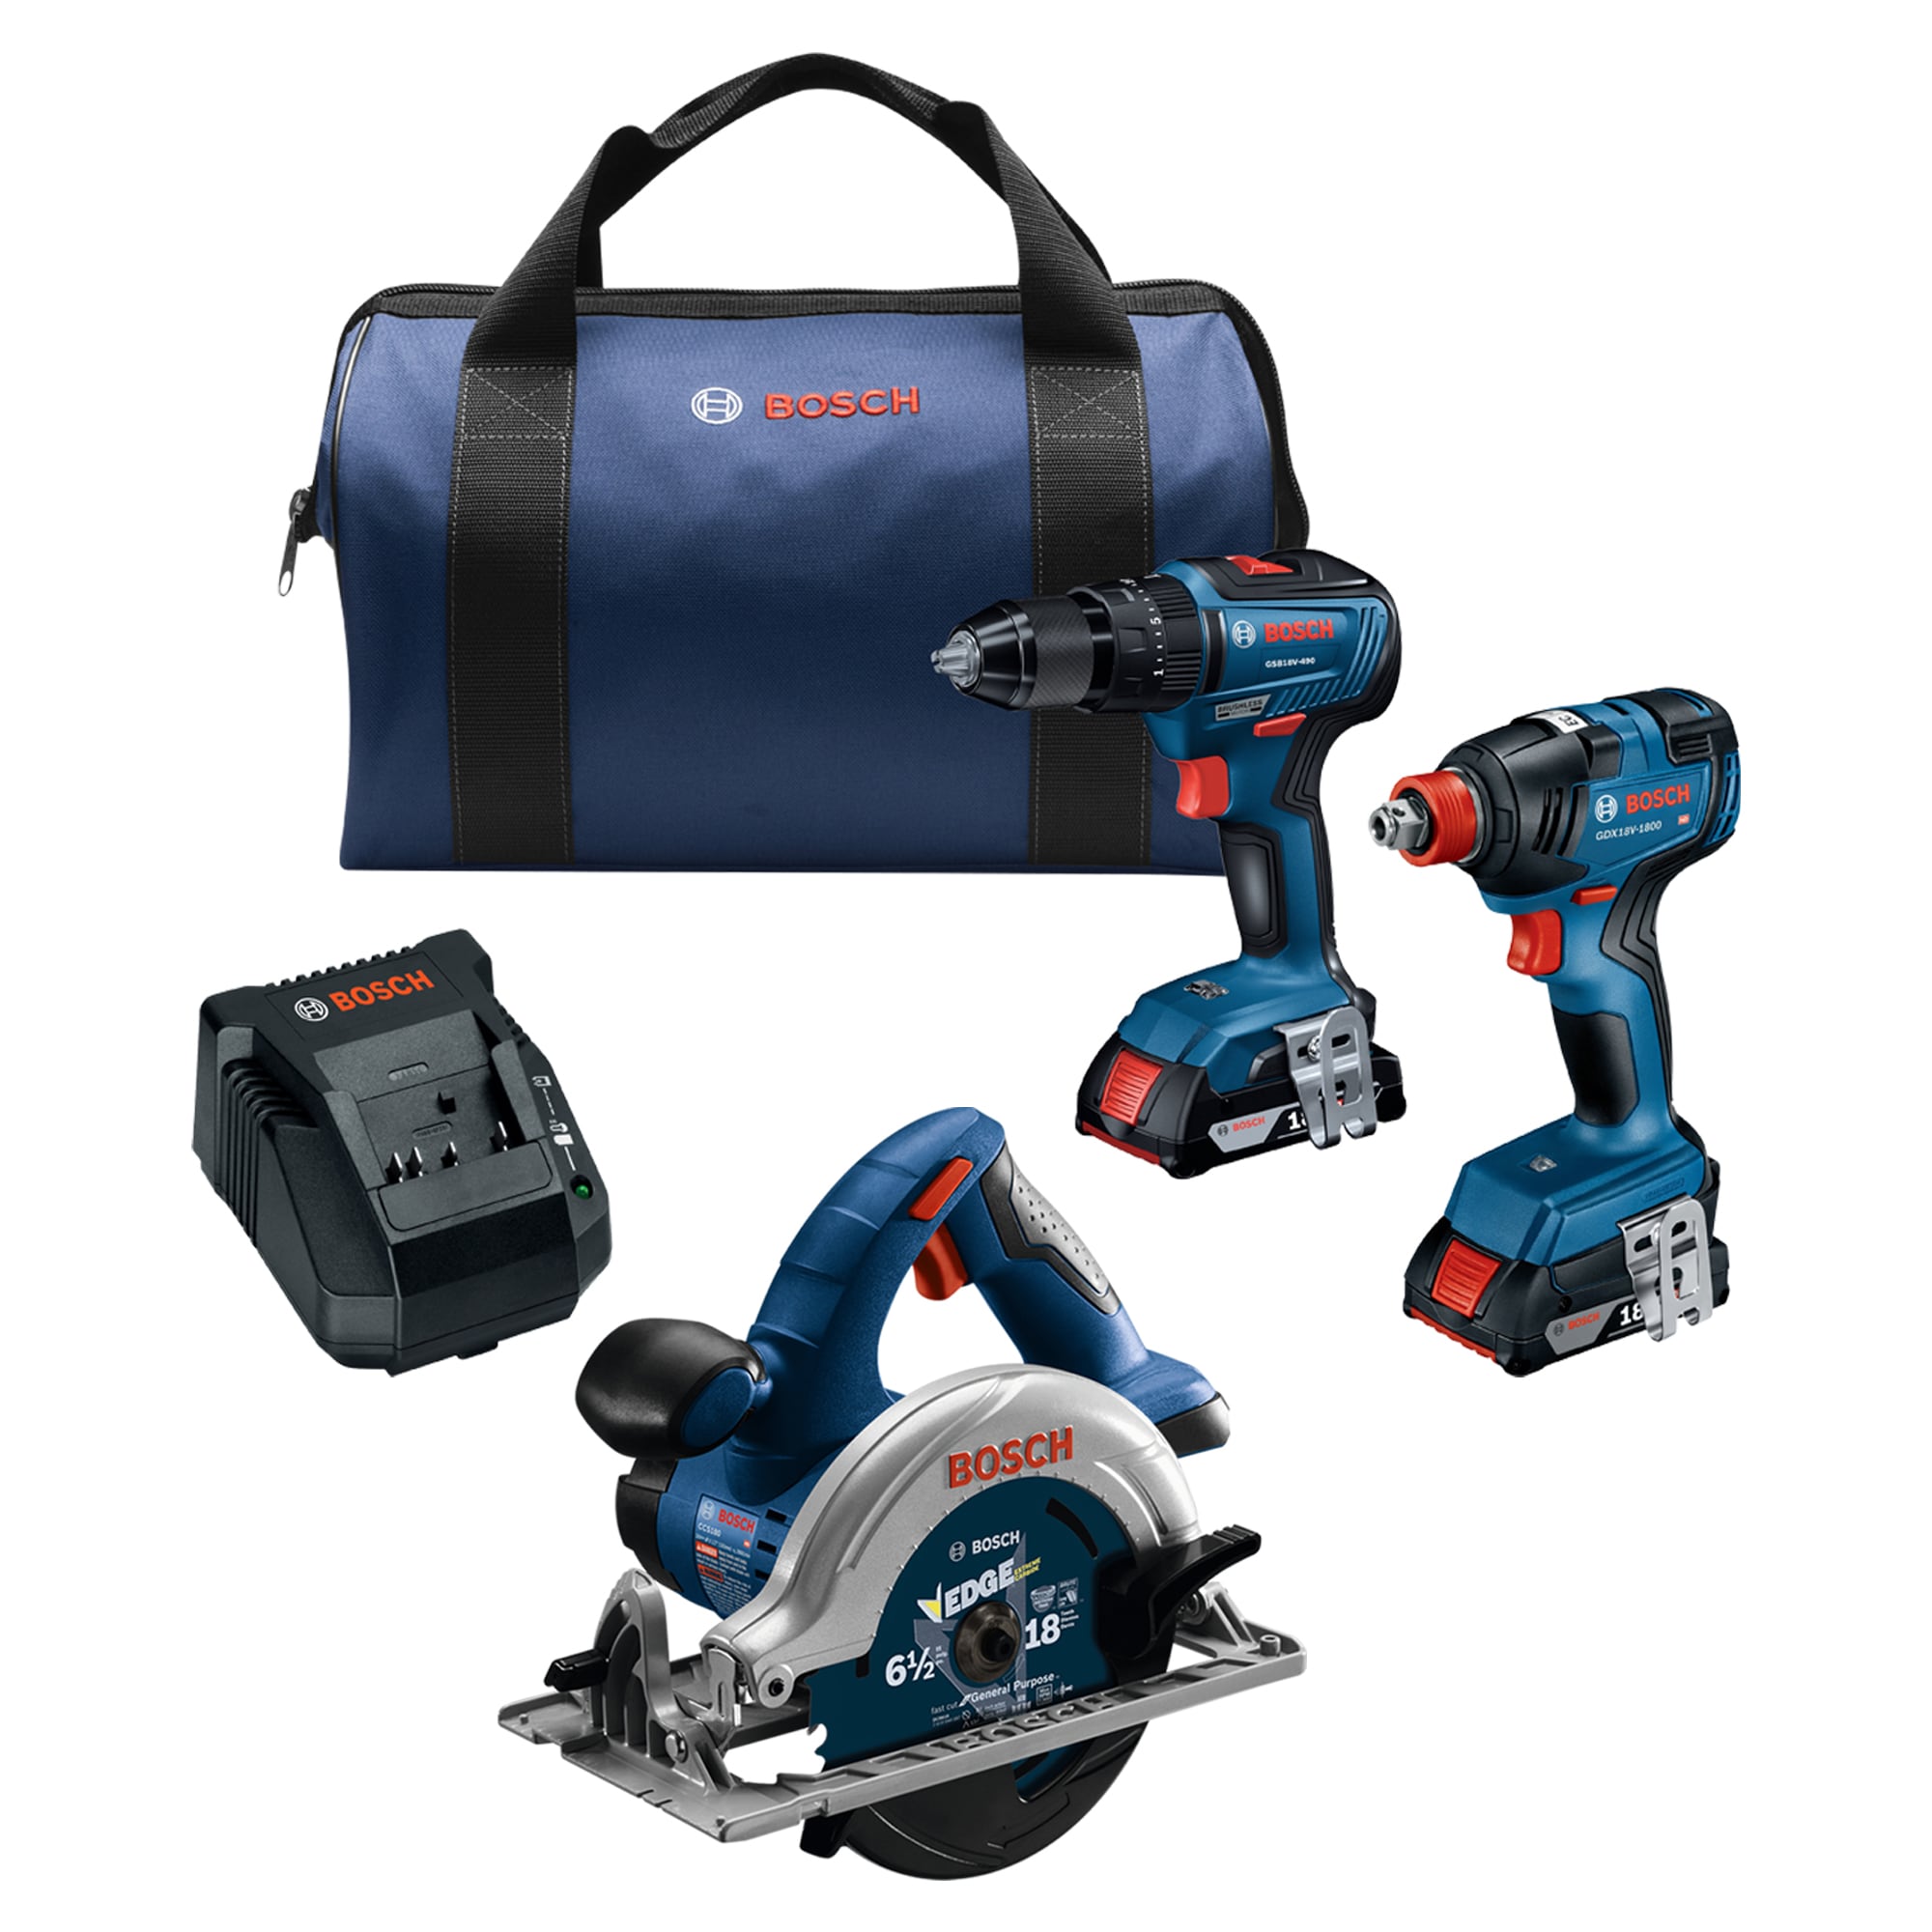 Bosch 18V 3-Tool Kit w/ Hammer Drill/2-in1 Impact Driver/ Circular Saw with  2x2.0ah Batteries, Charger and Bag